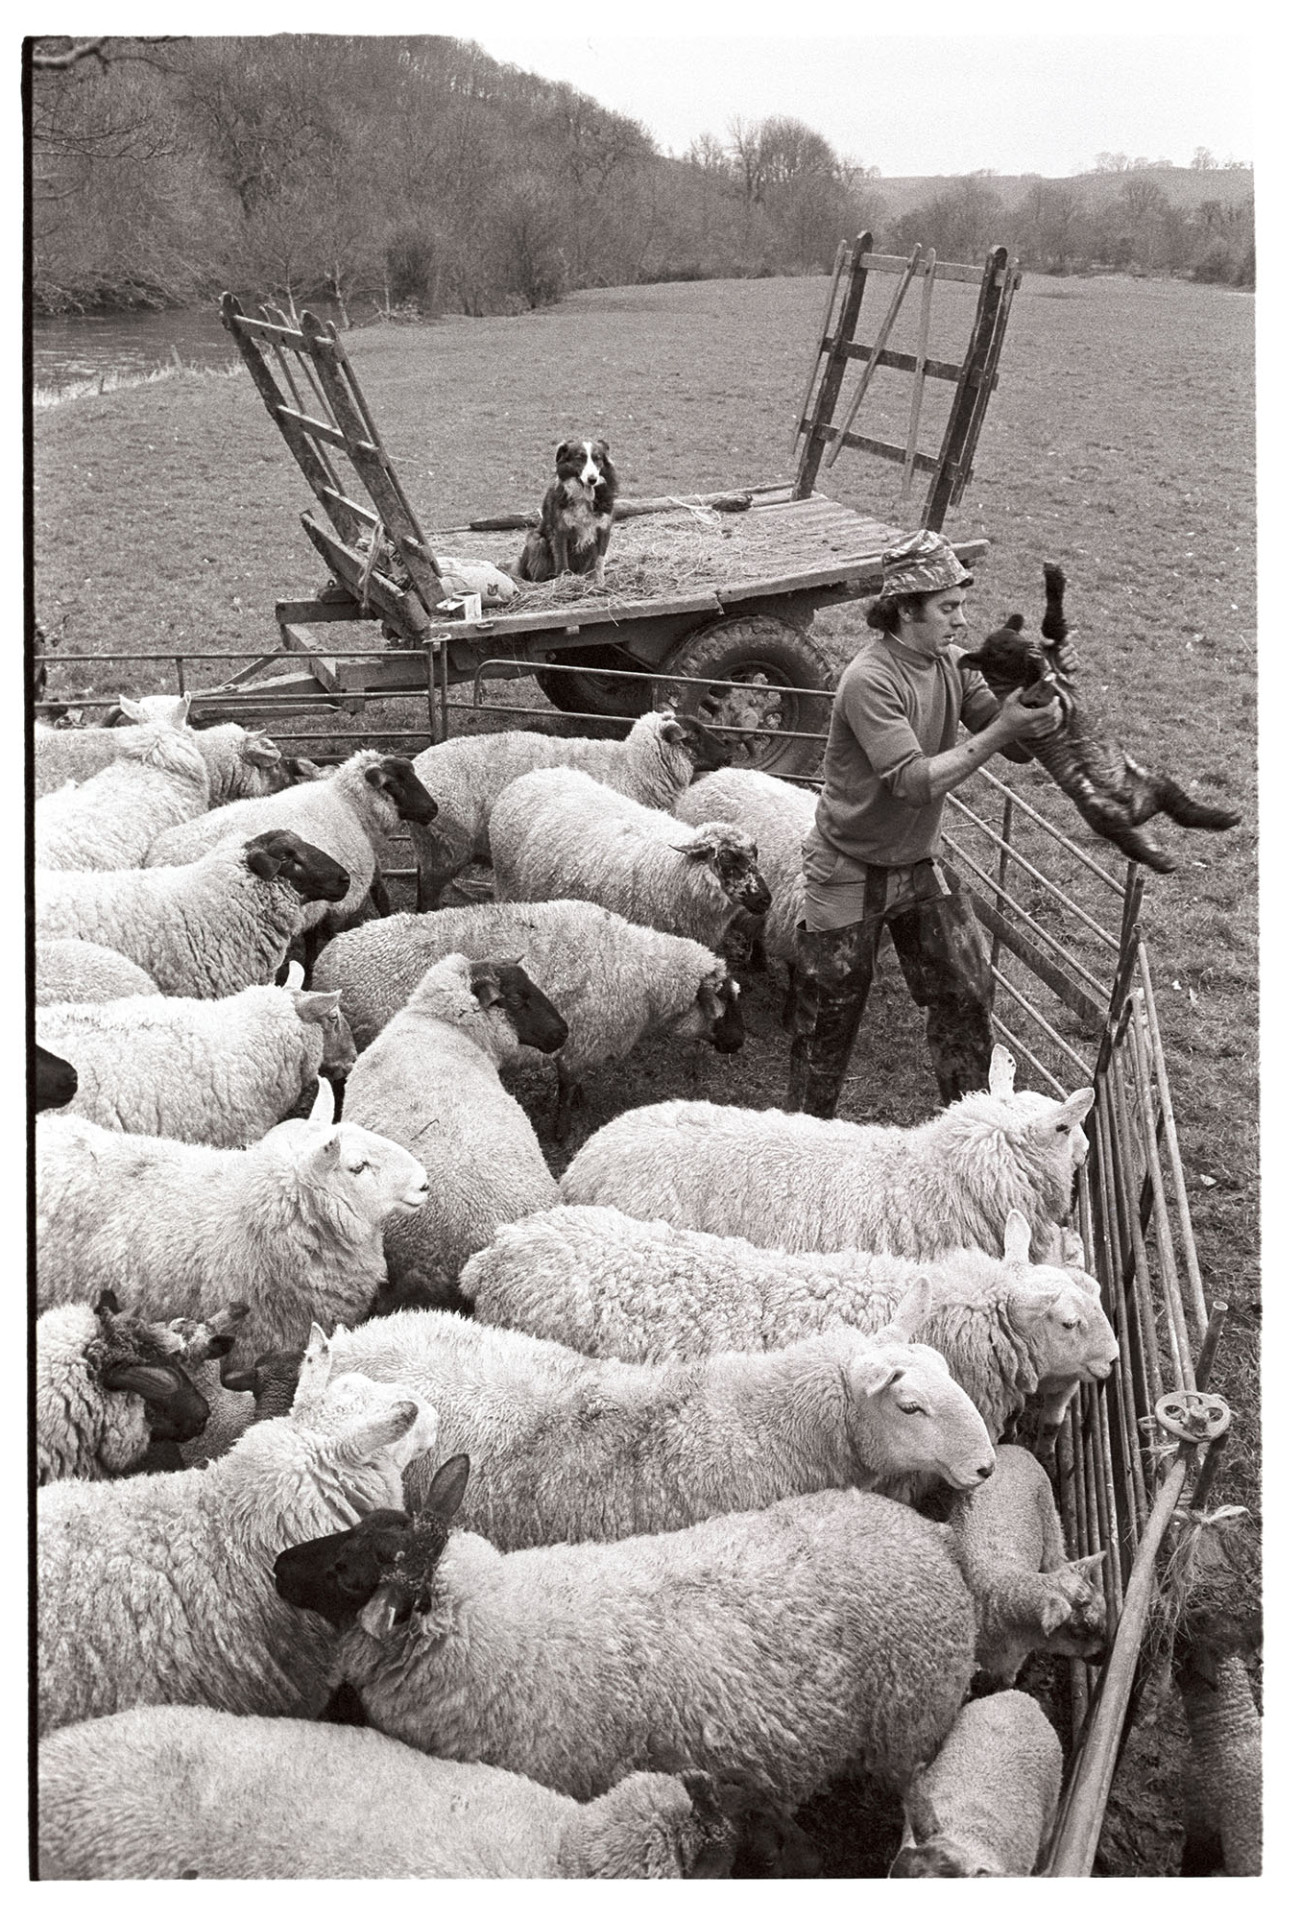 Sorting ewes and lambs in pen.
[Graham Ward lifting a lamb either into or out of a pen of sheep in a field at Parsonage Farm, Iddesleigh. His dog is sitting on a trailer in the background.]